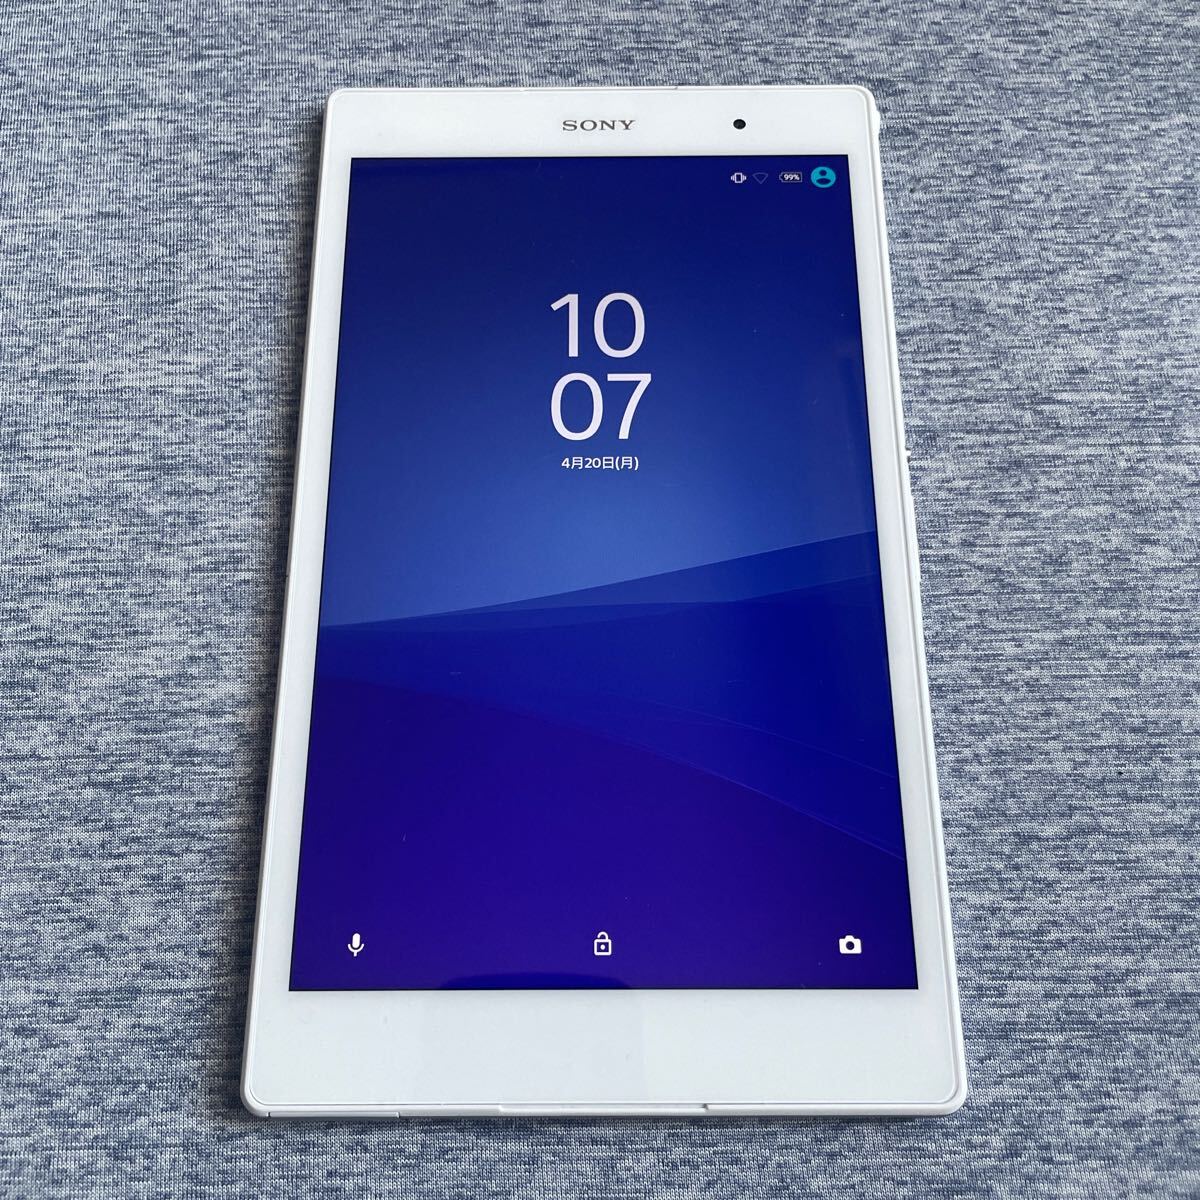 SONY Xperia Z3 Tablet Compact Wi-Fiモデル 16GB SGP611JP